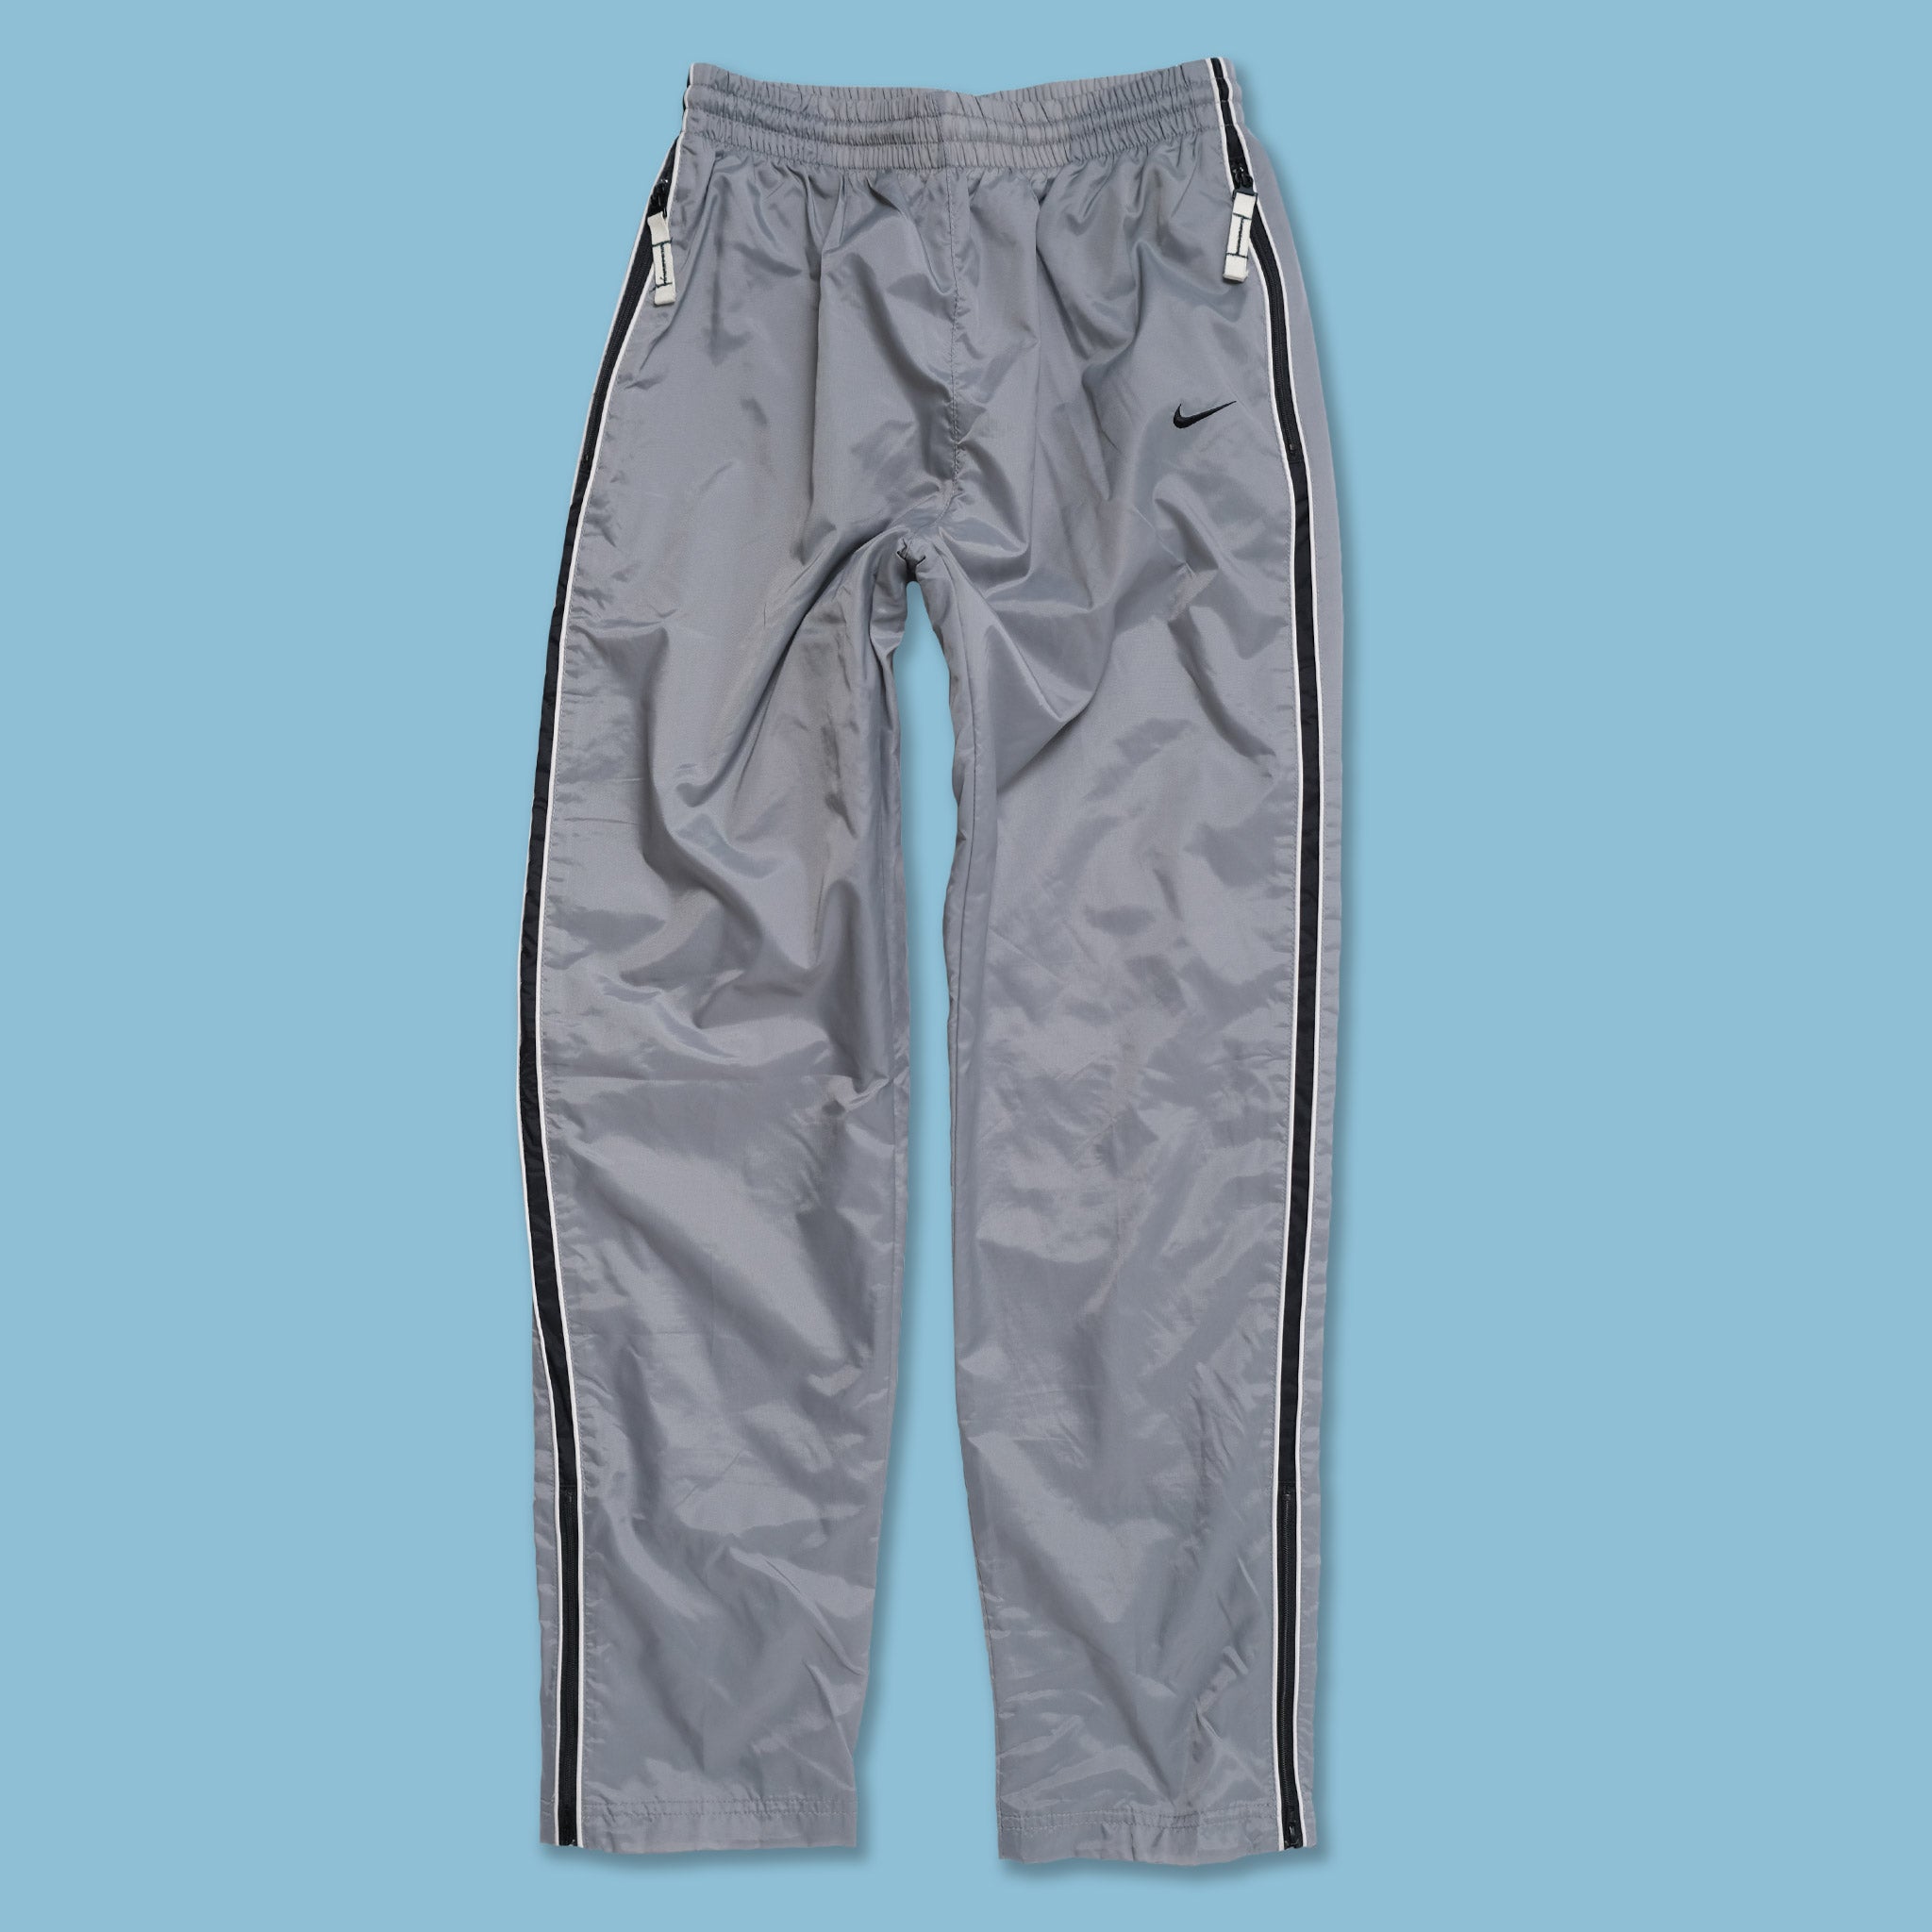 Nike vintage grey track pants small logo 2000s cargo – Refitted